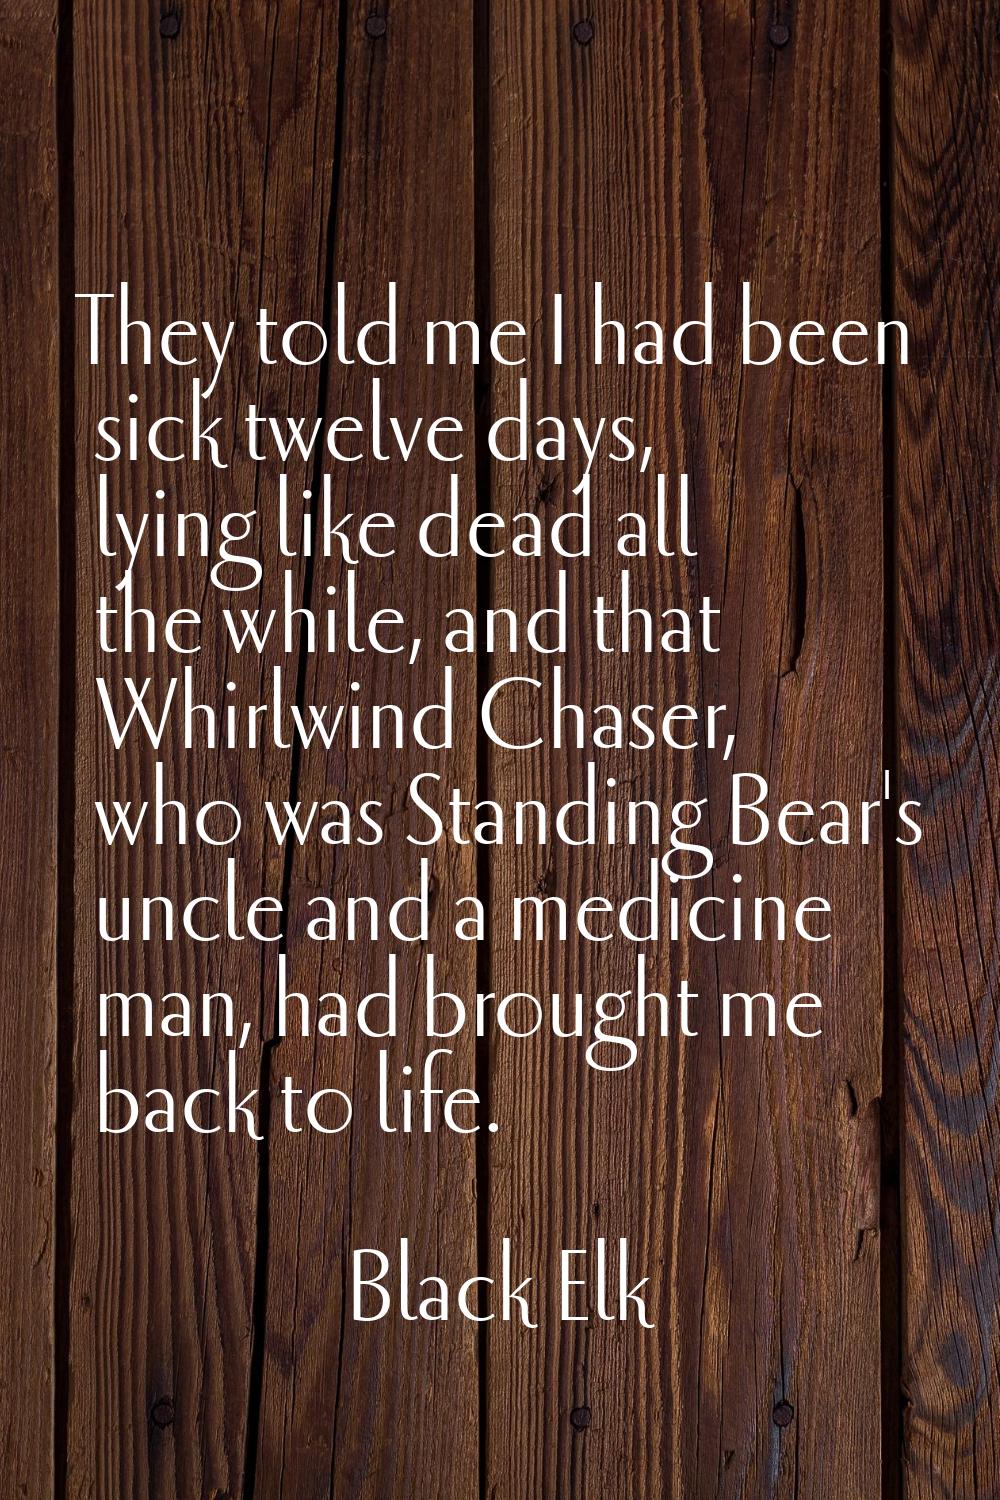 They told me I had been sick twelve days, lying like dead all the while, and that Whirlwind Chaser,